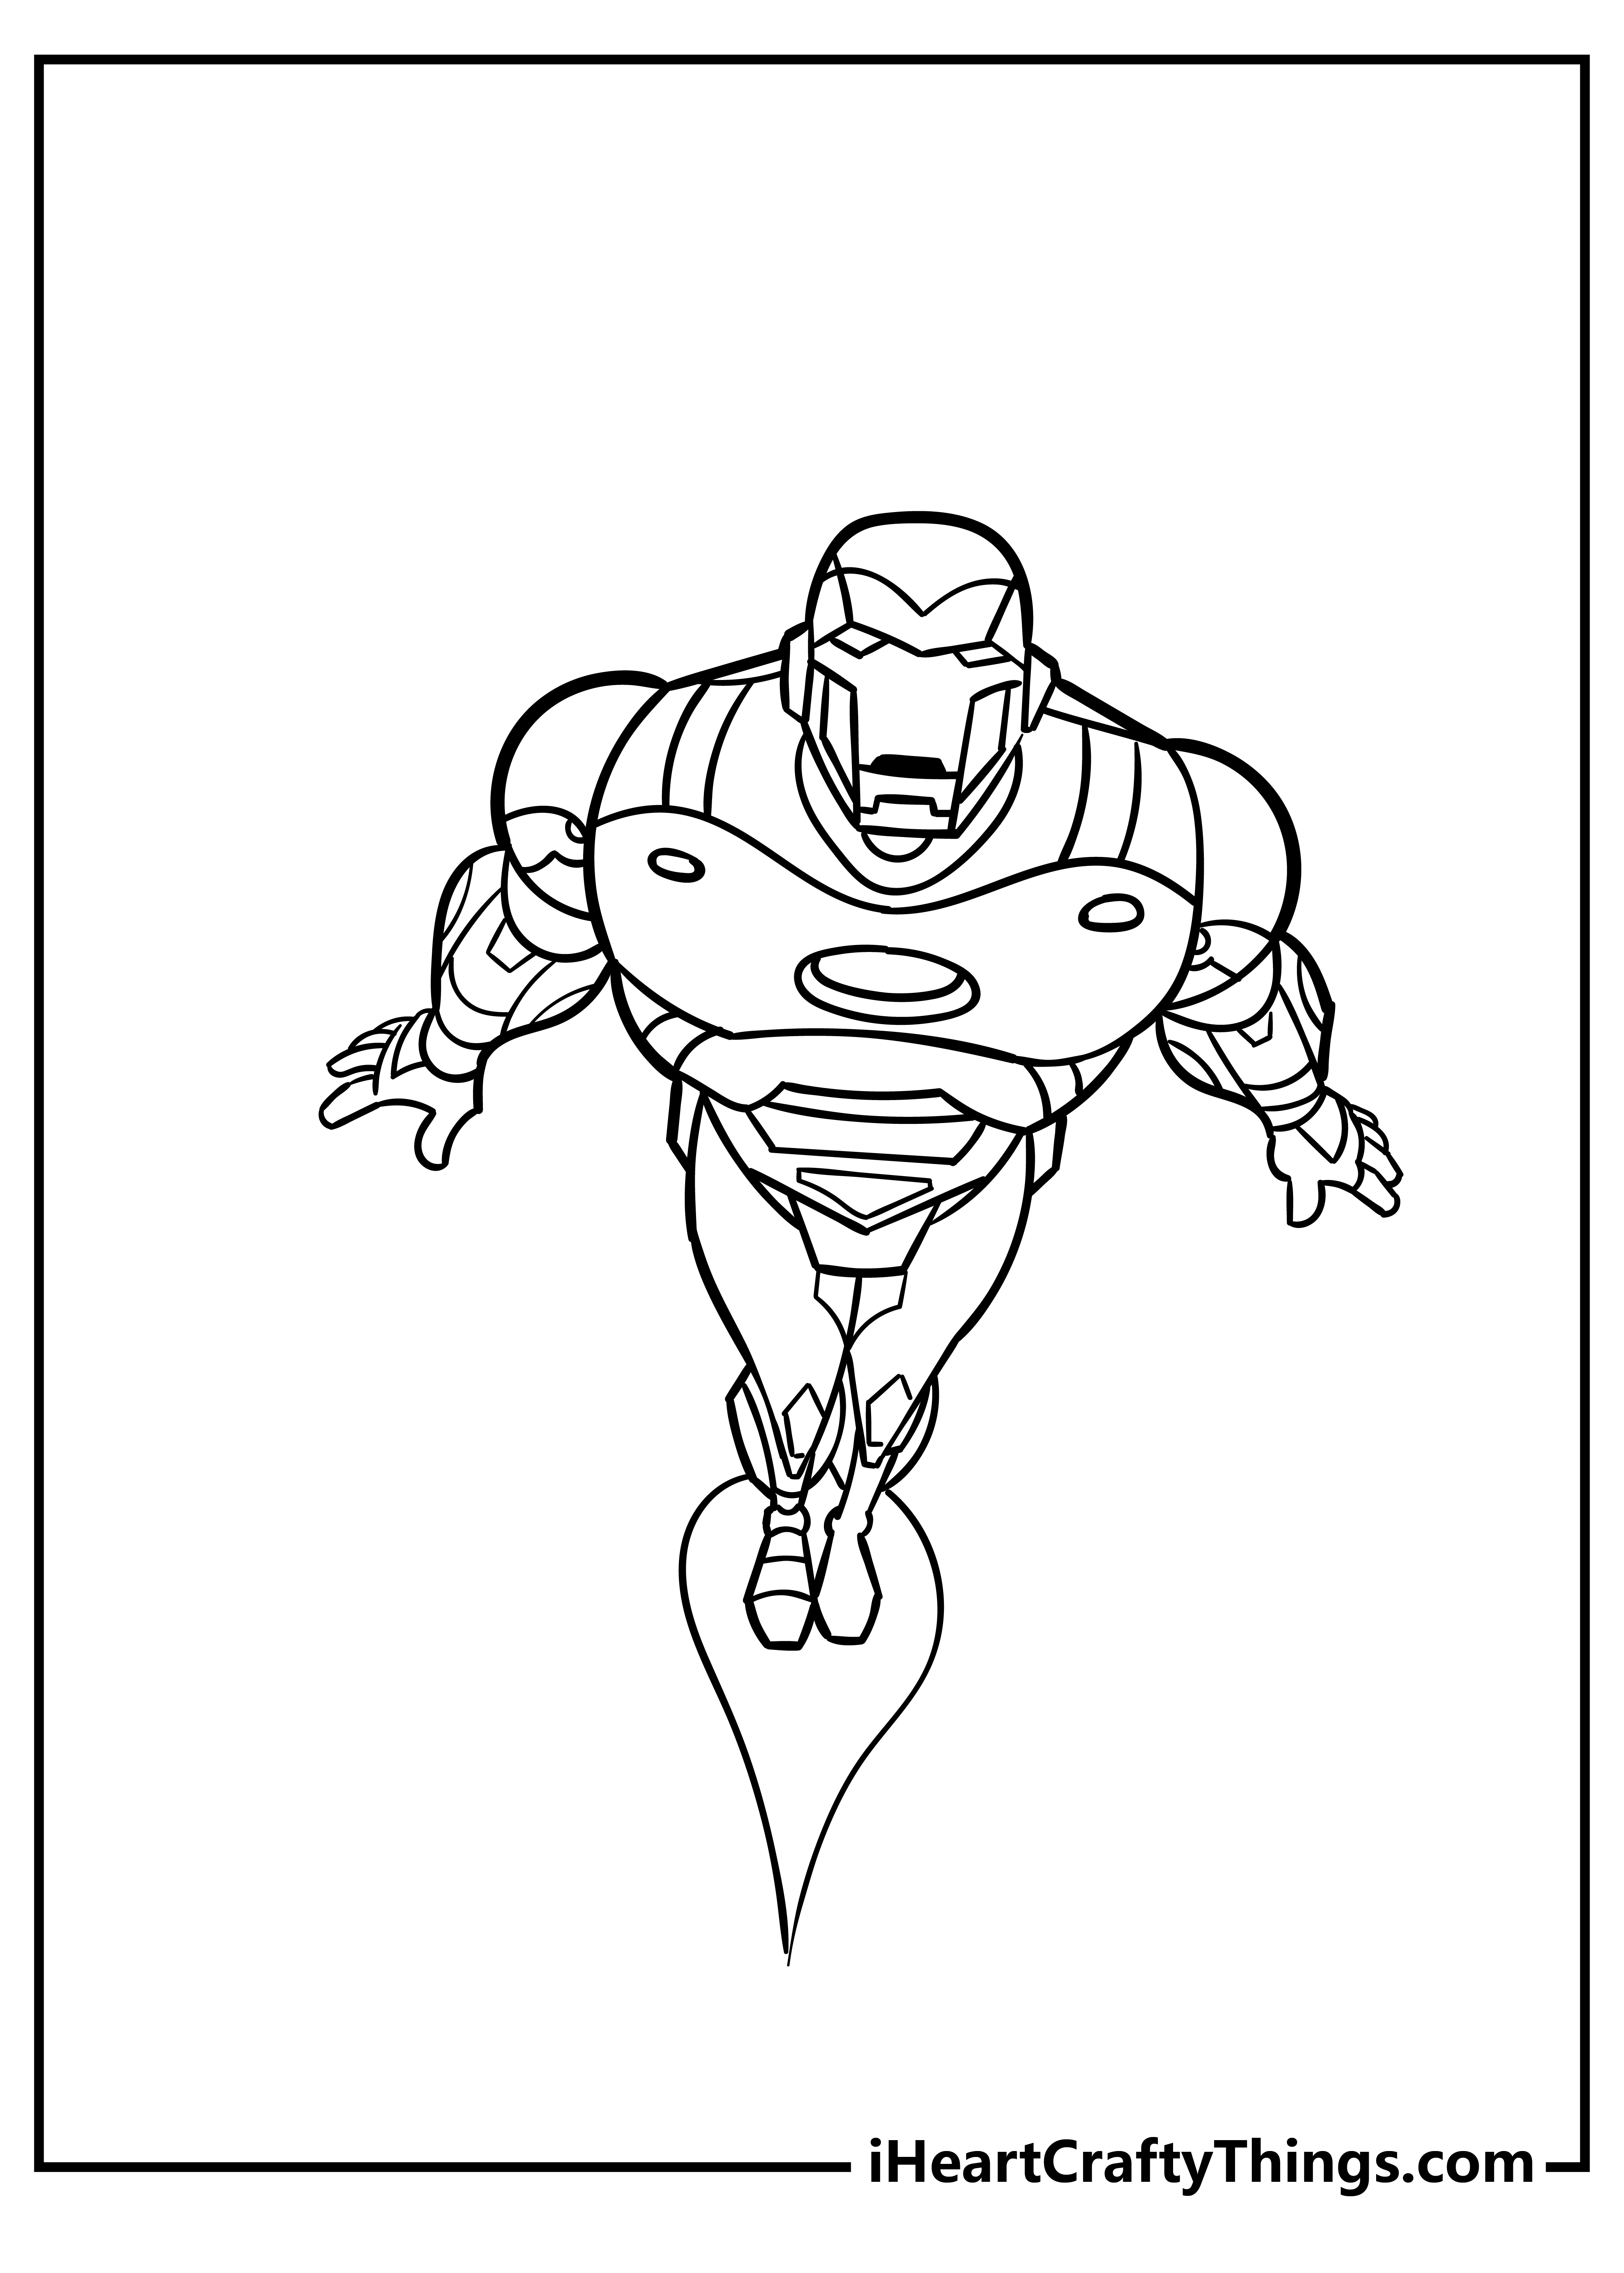 Iron Man Coloring Book for kids free printable